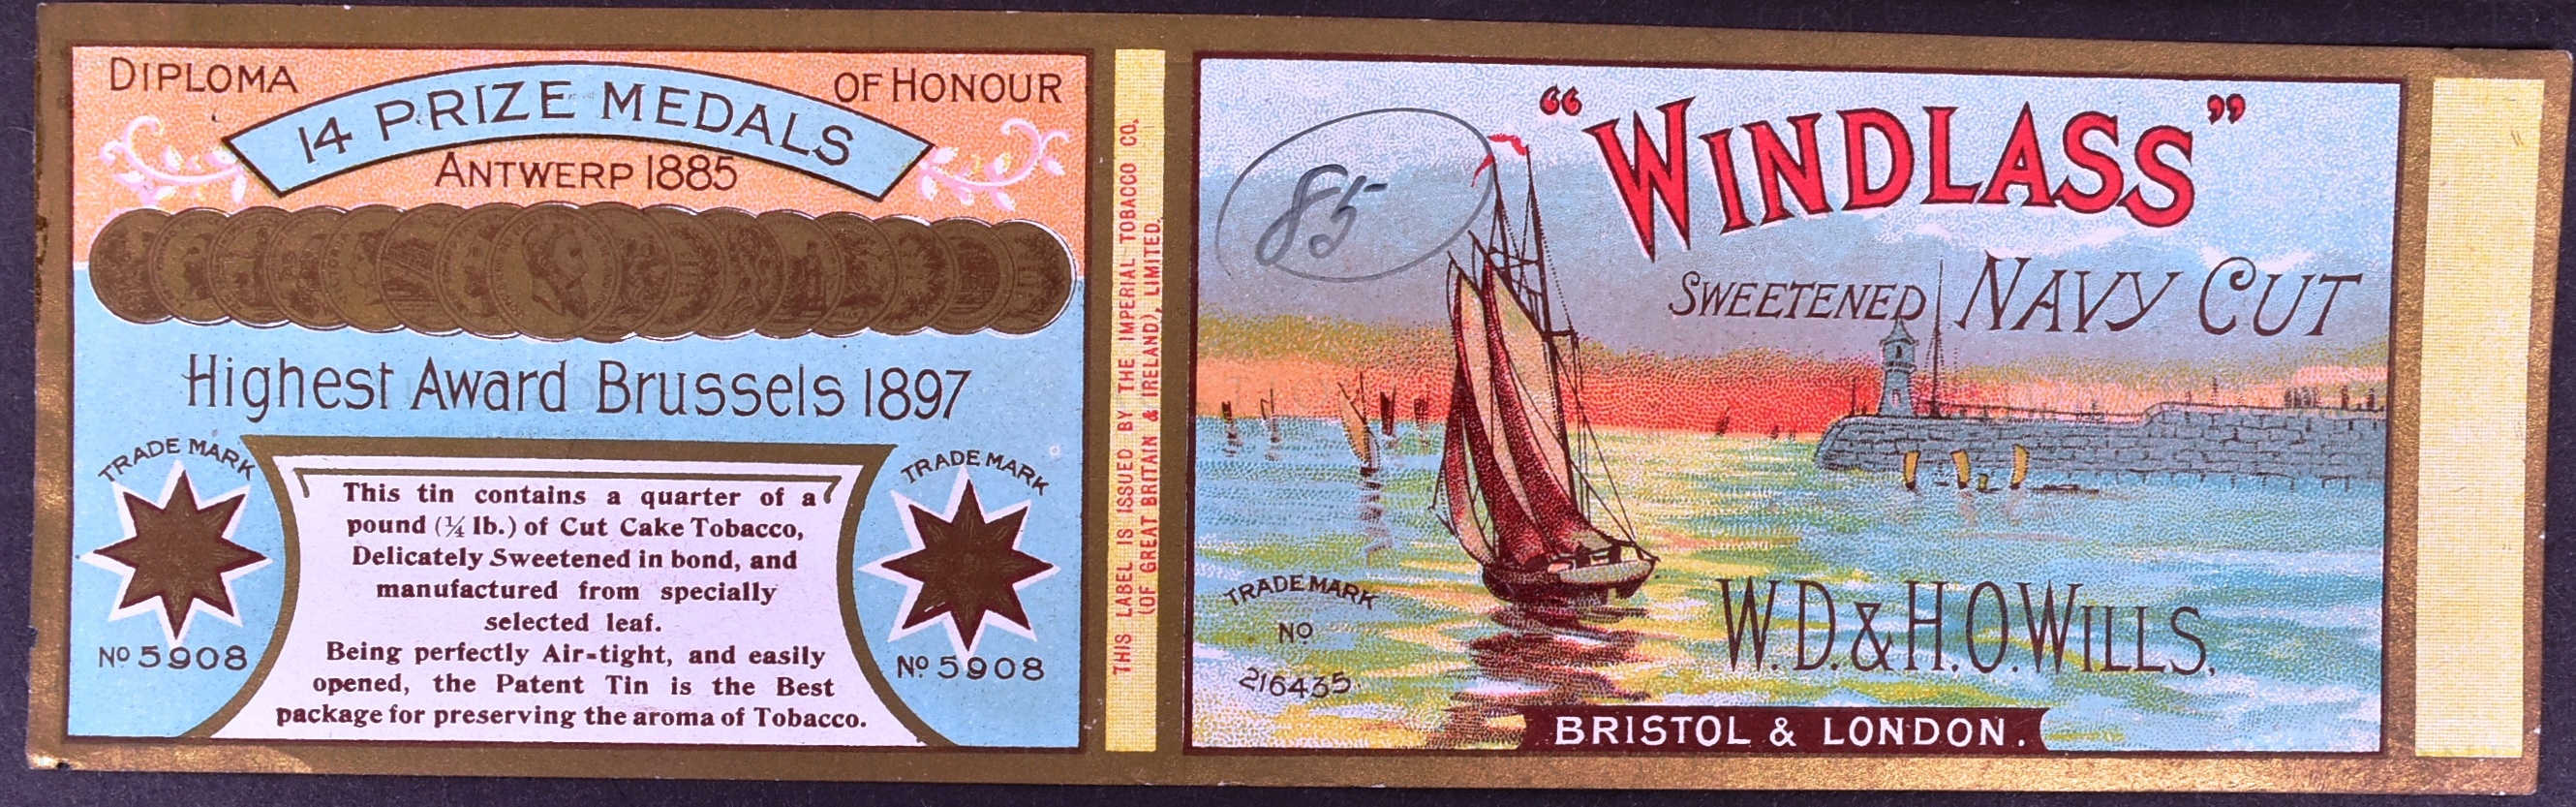 MARDON, SON & HALL - EARLY 20TH CENTURY CIGARETTE PACKET / LABEL DESIGNS - Image 5 of 6